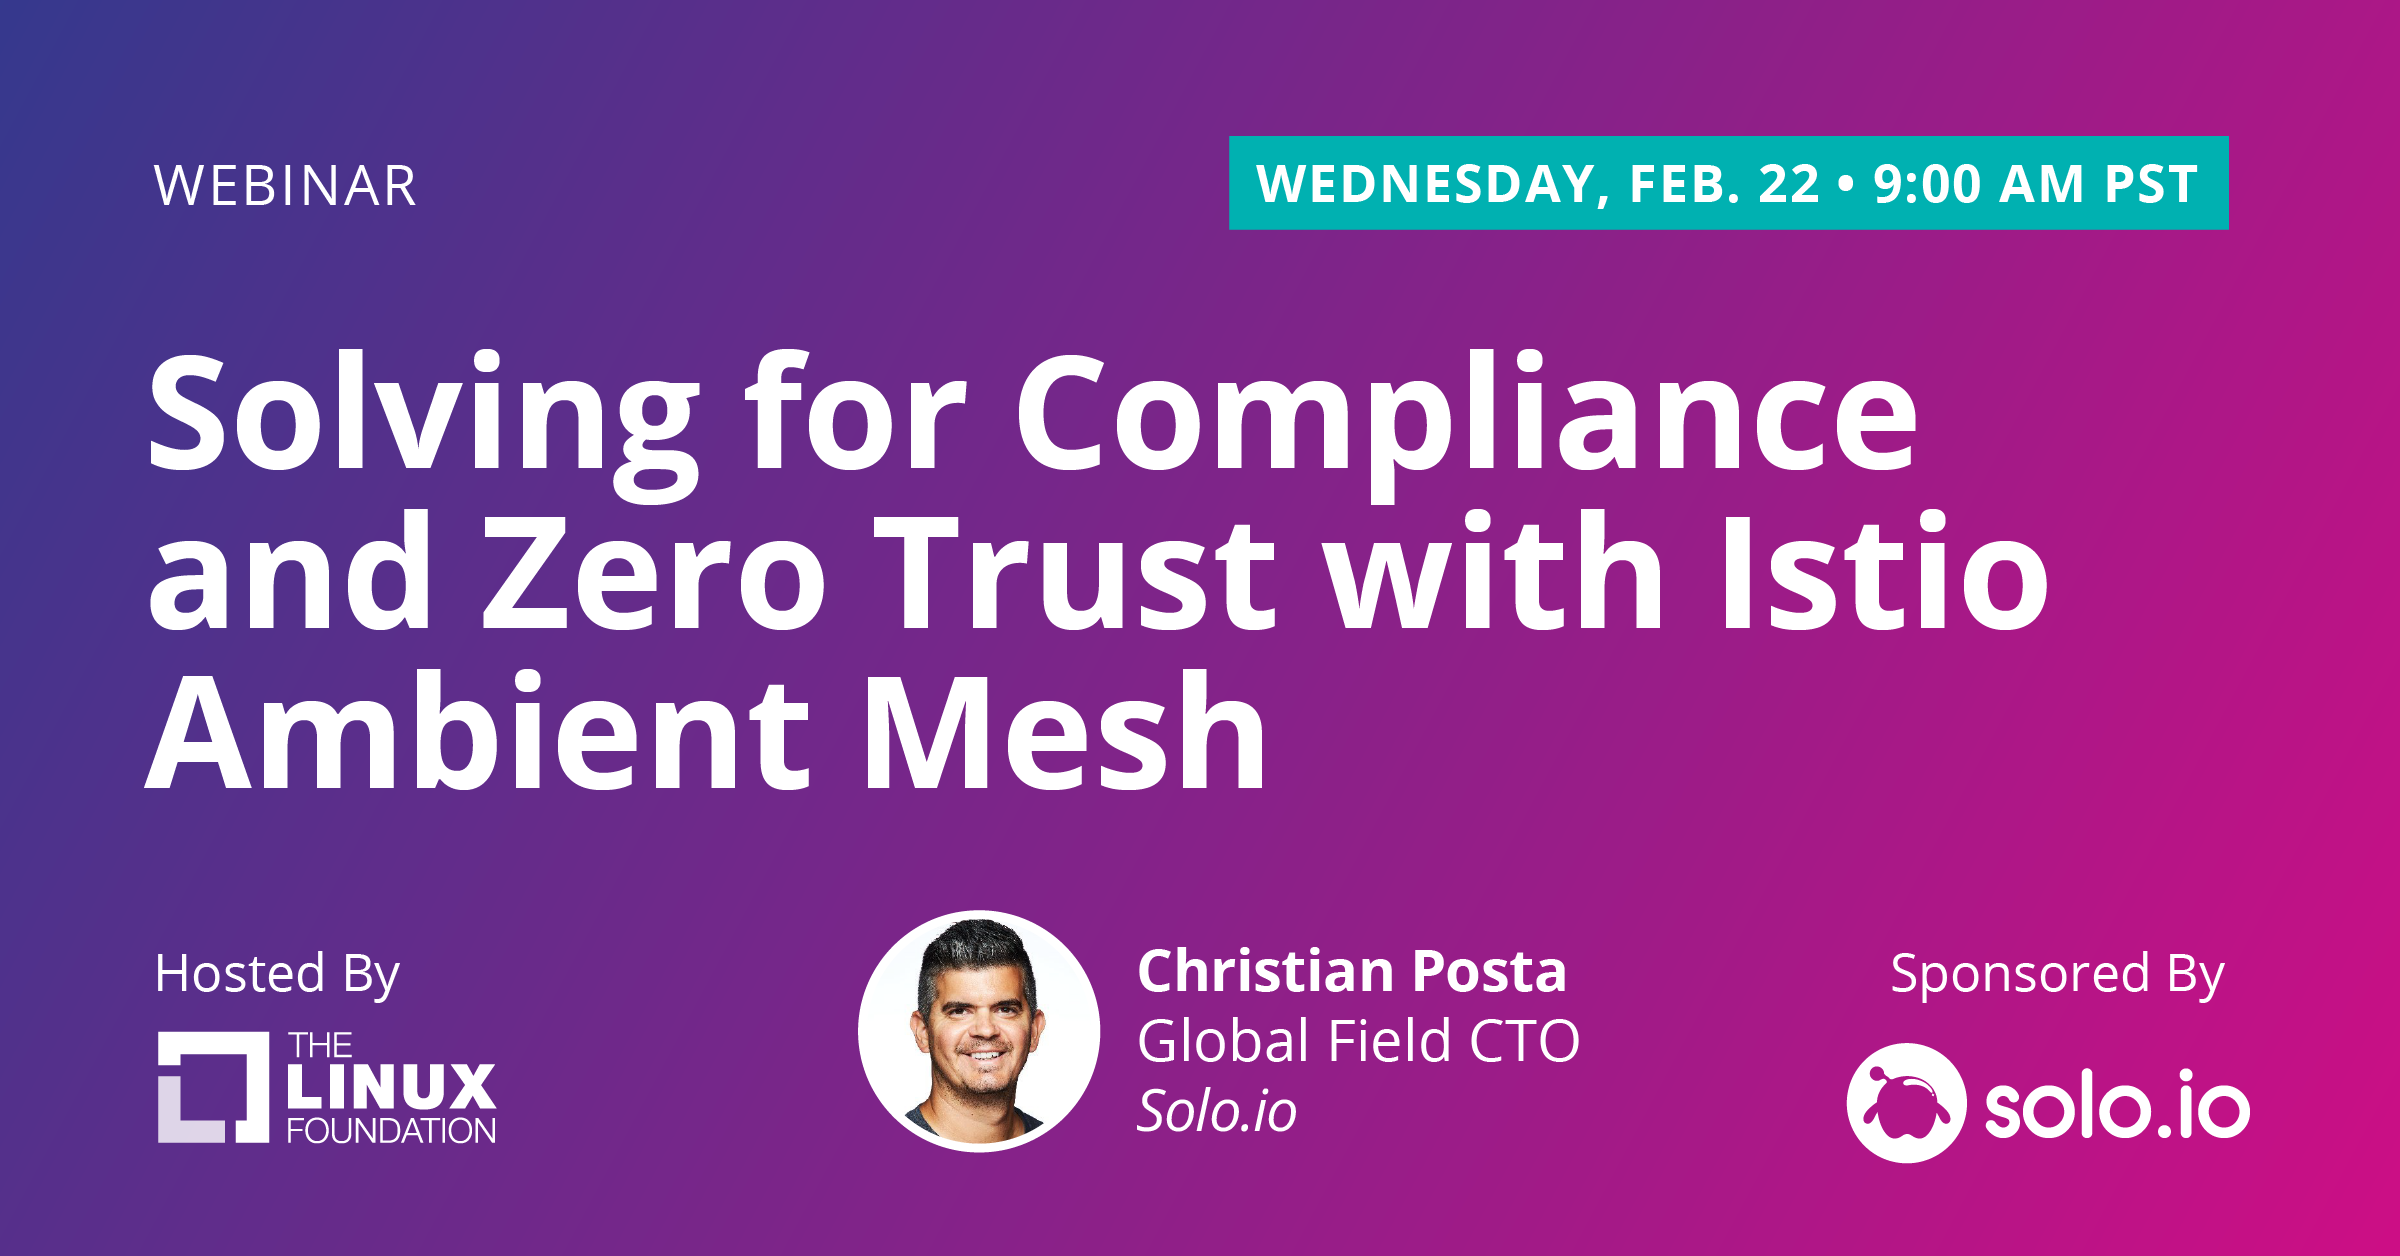 Solving for Compliance and Zero Trust with Istio Ambient Mesh featured image